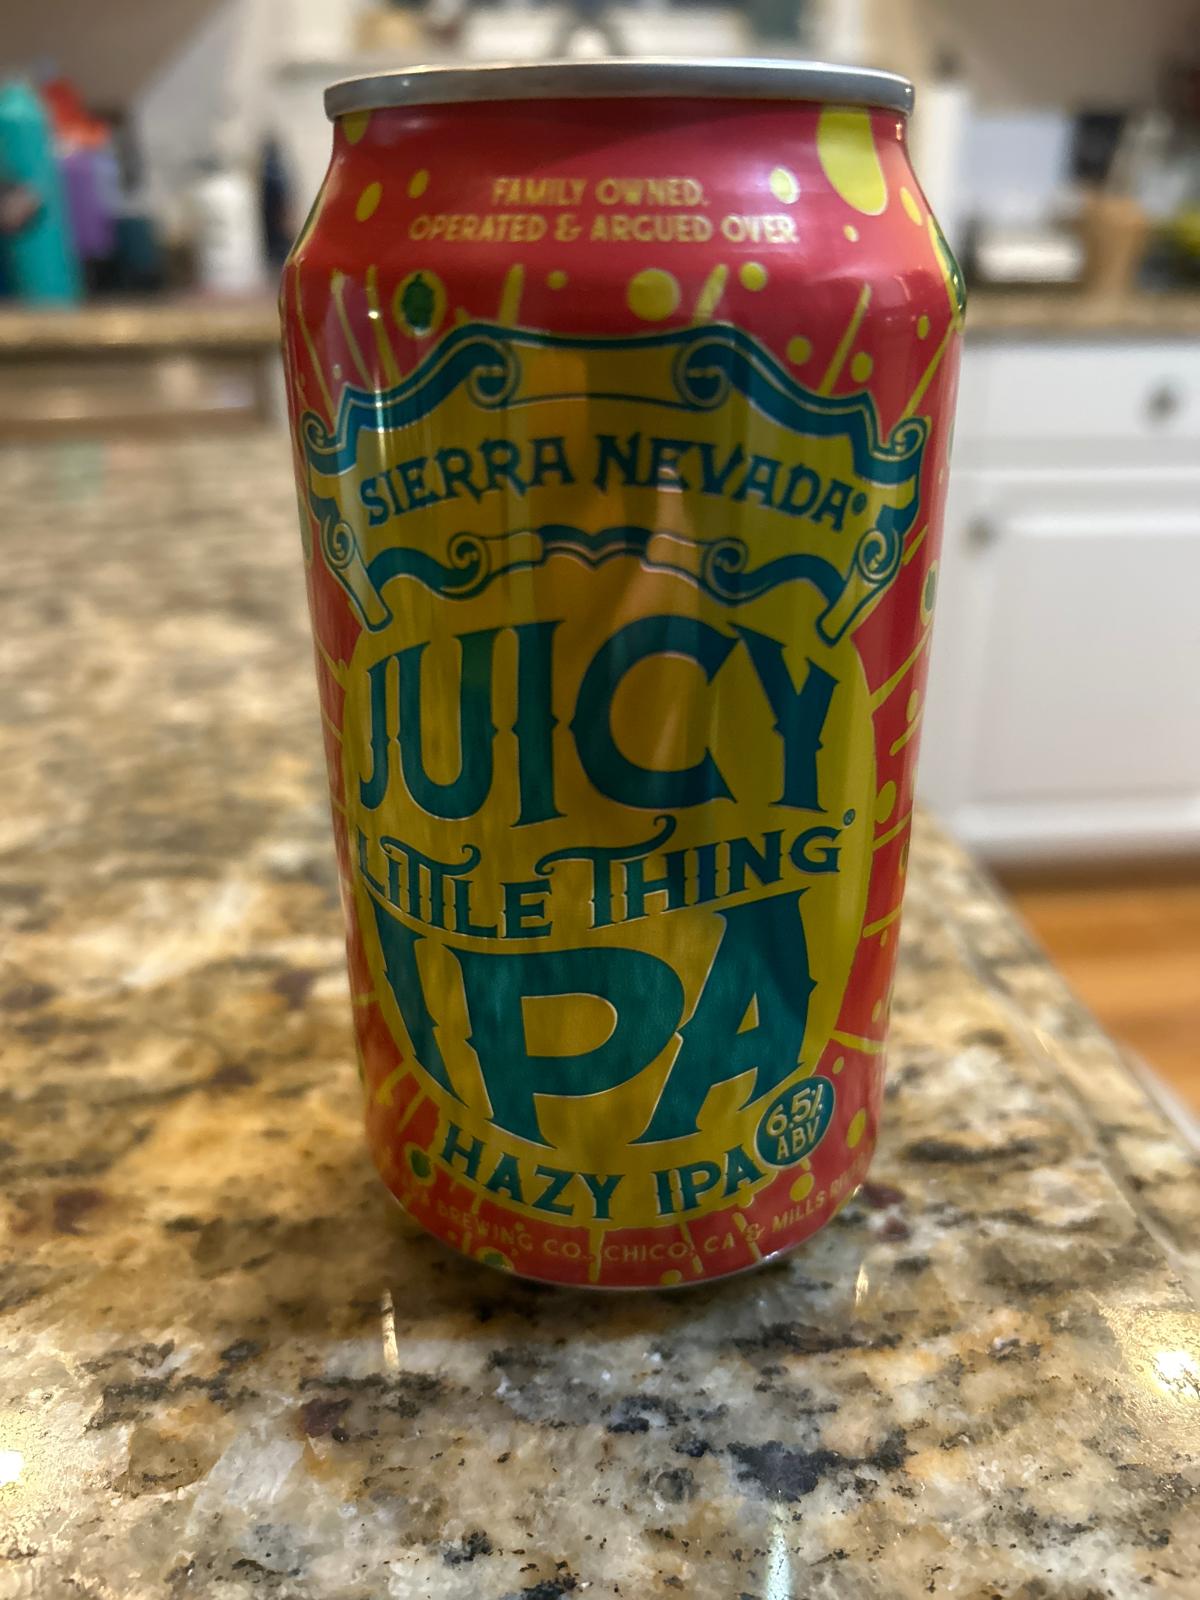 Juicy Little Thing